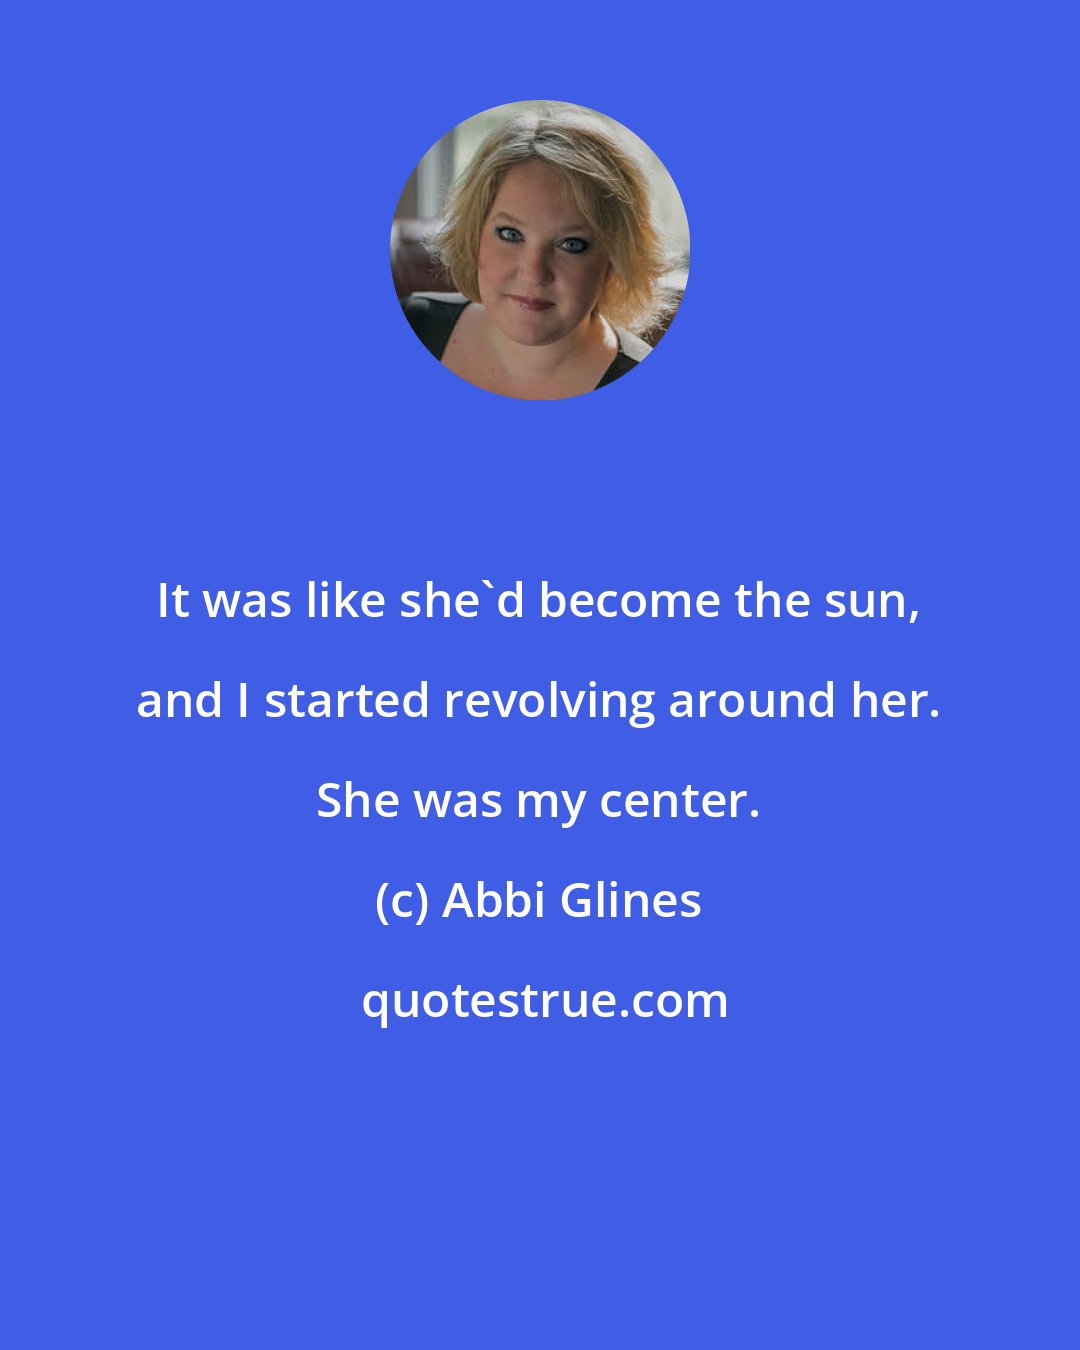 Abbi Glines: It was like she'd become the sun, and I started revolving around her. She was my center.